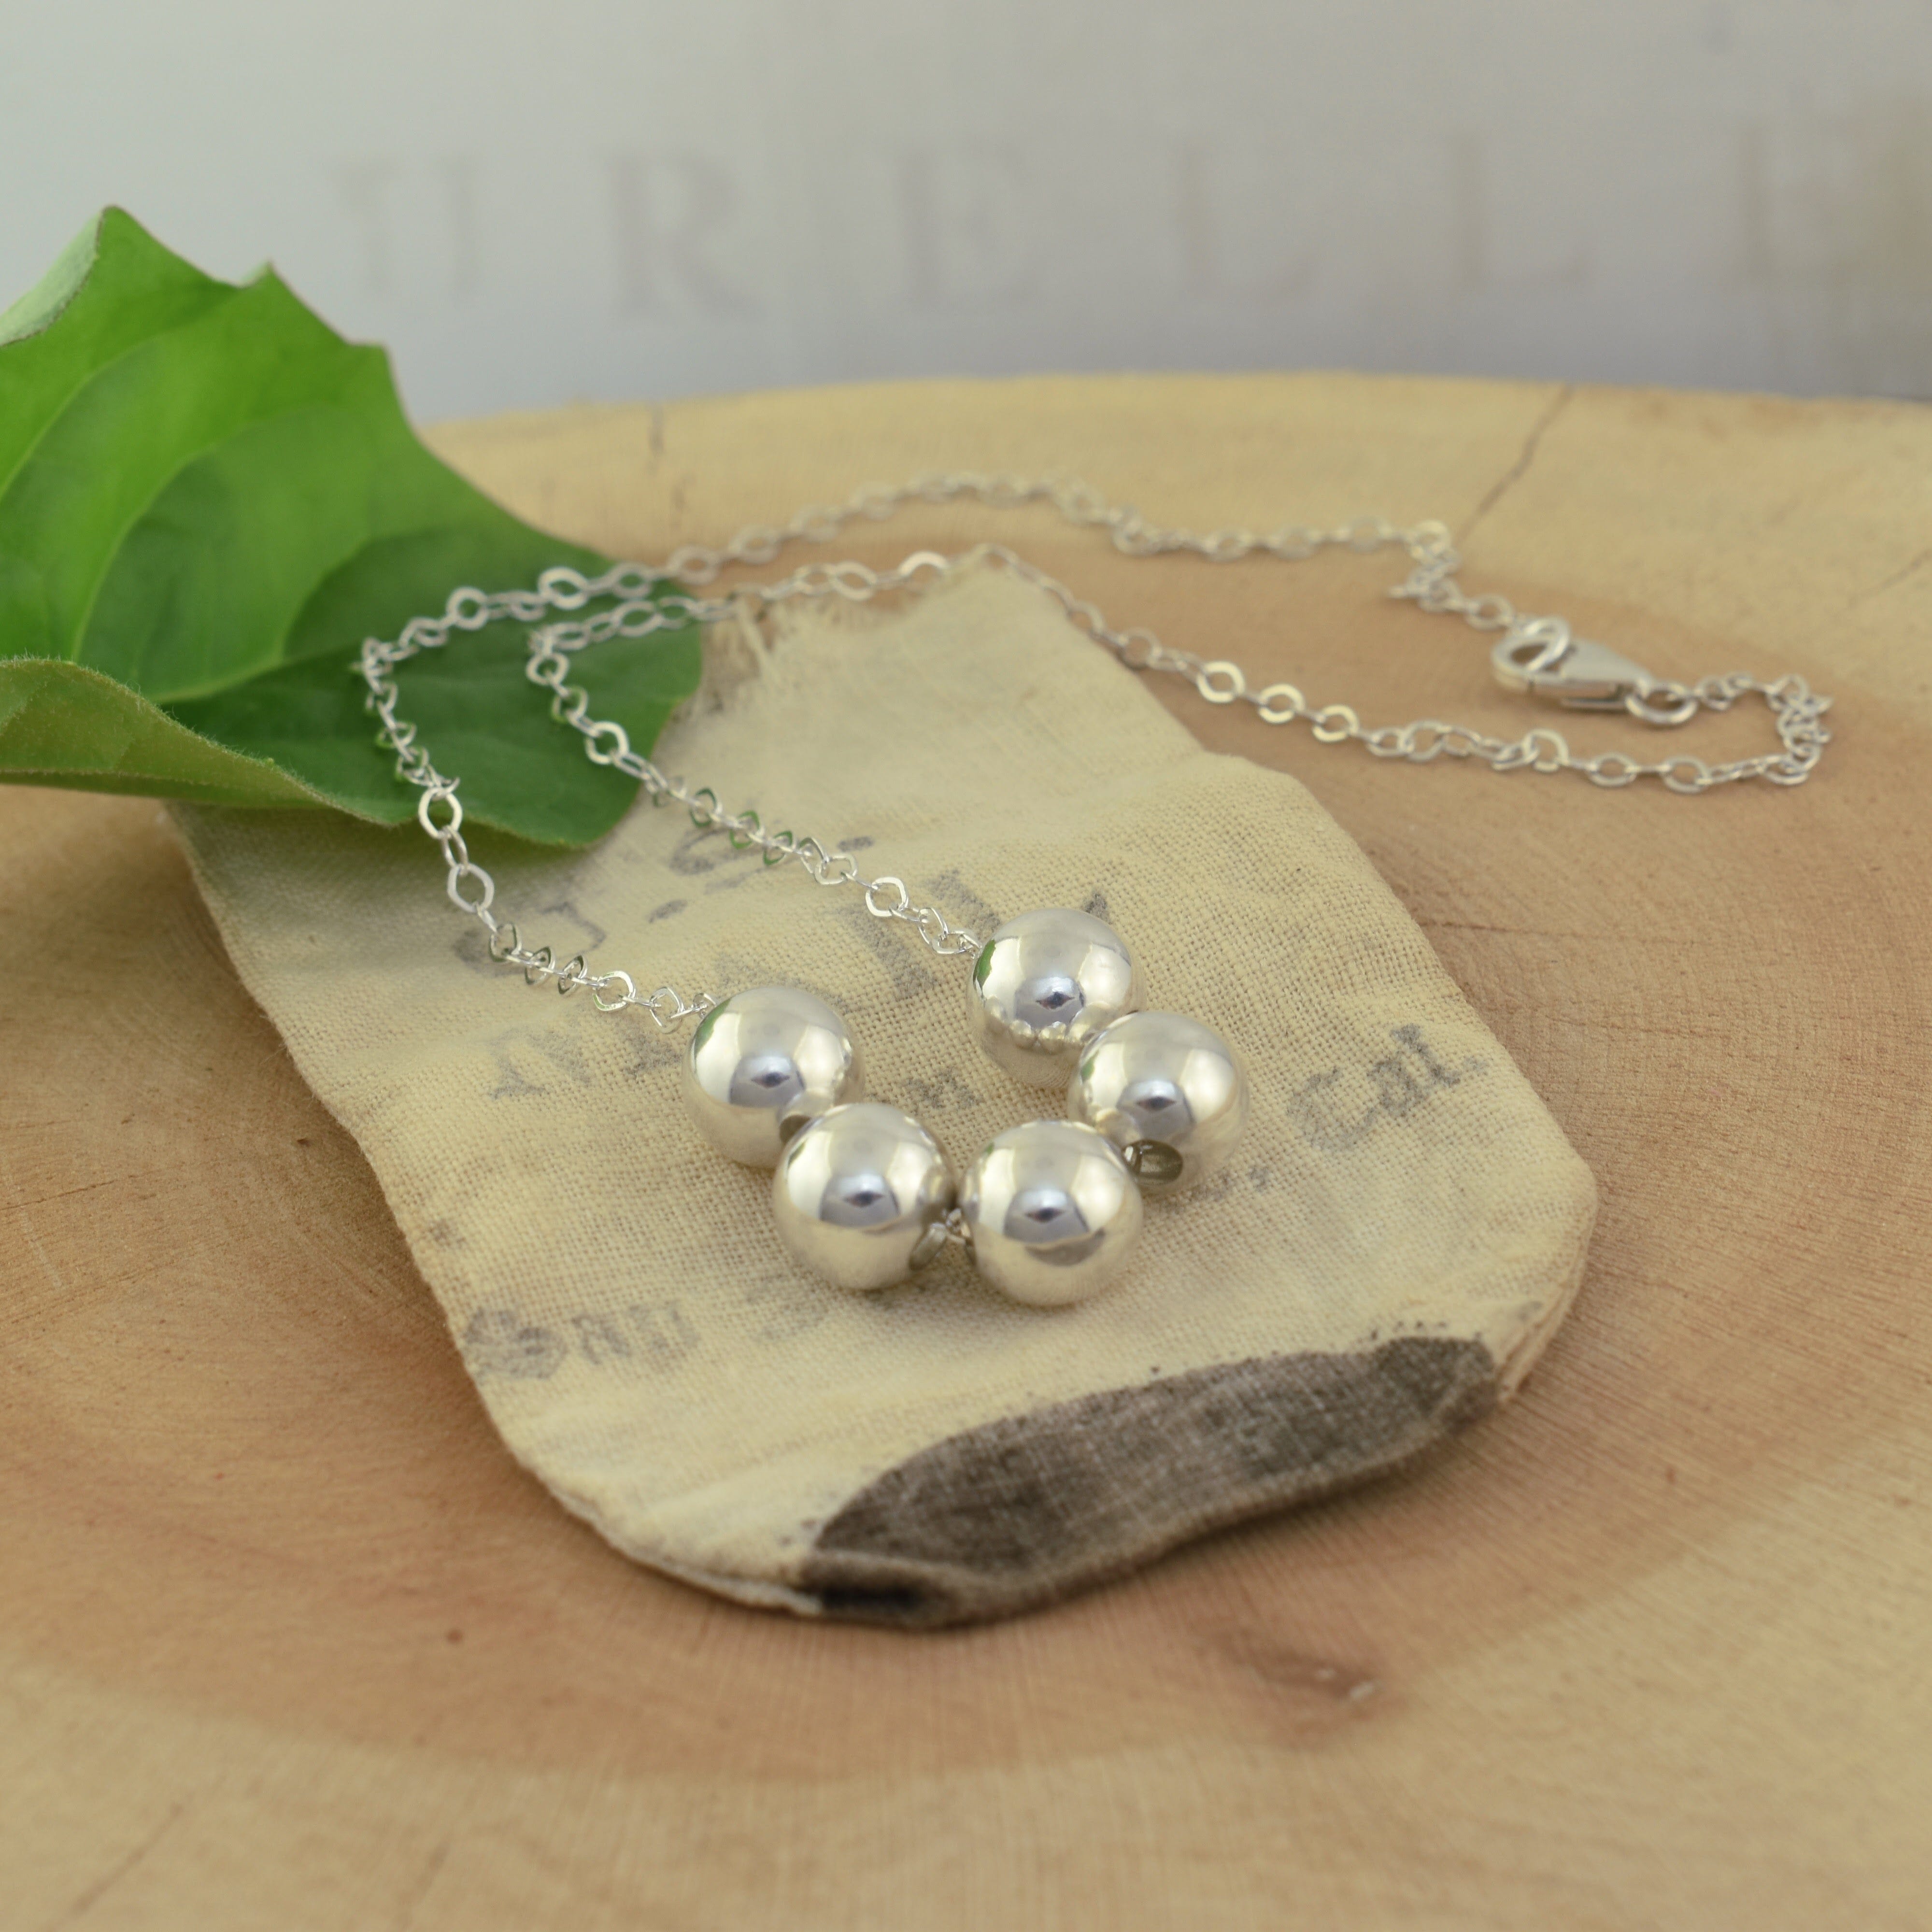 Handcrafted sterling silver bead necklace